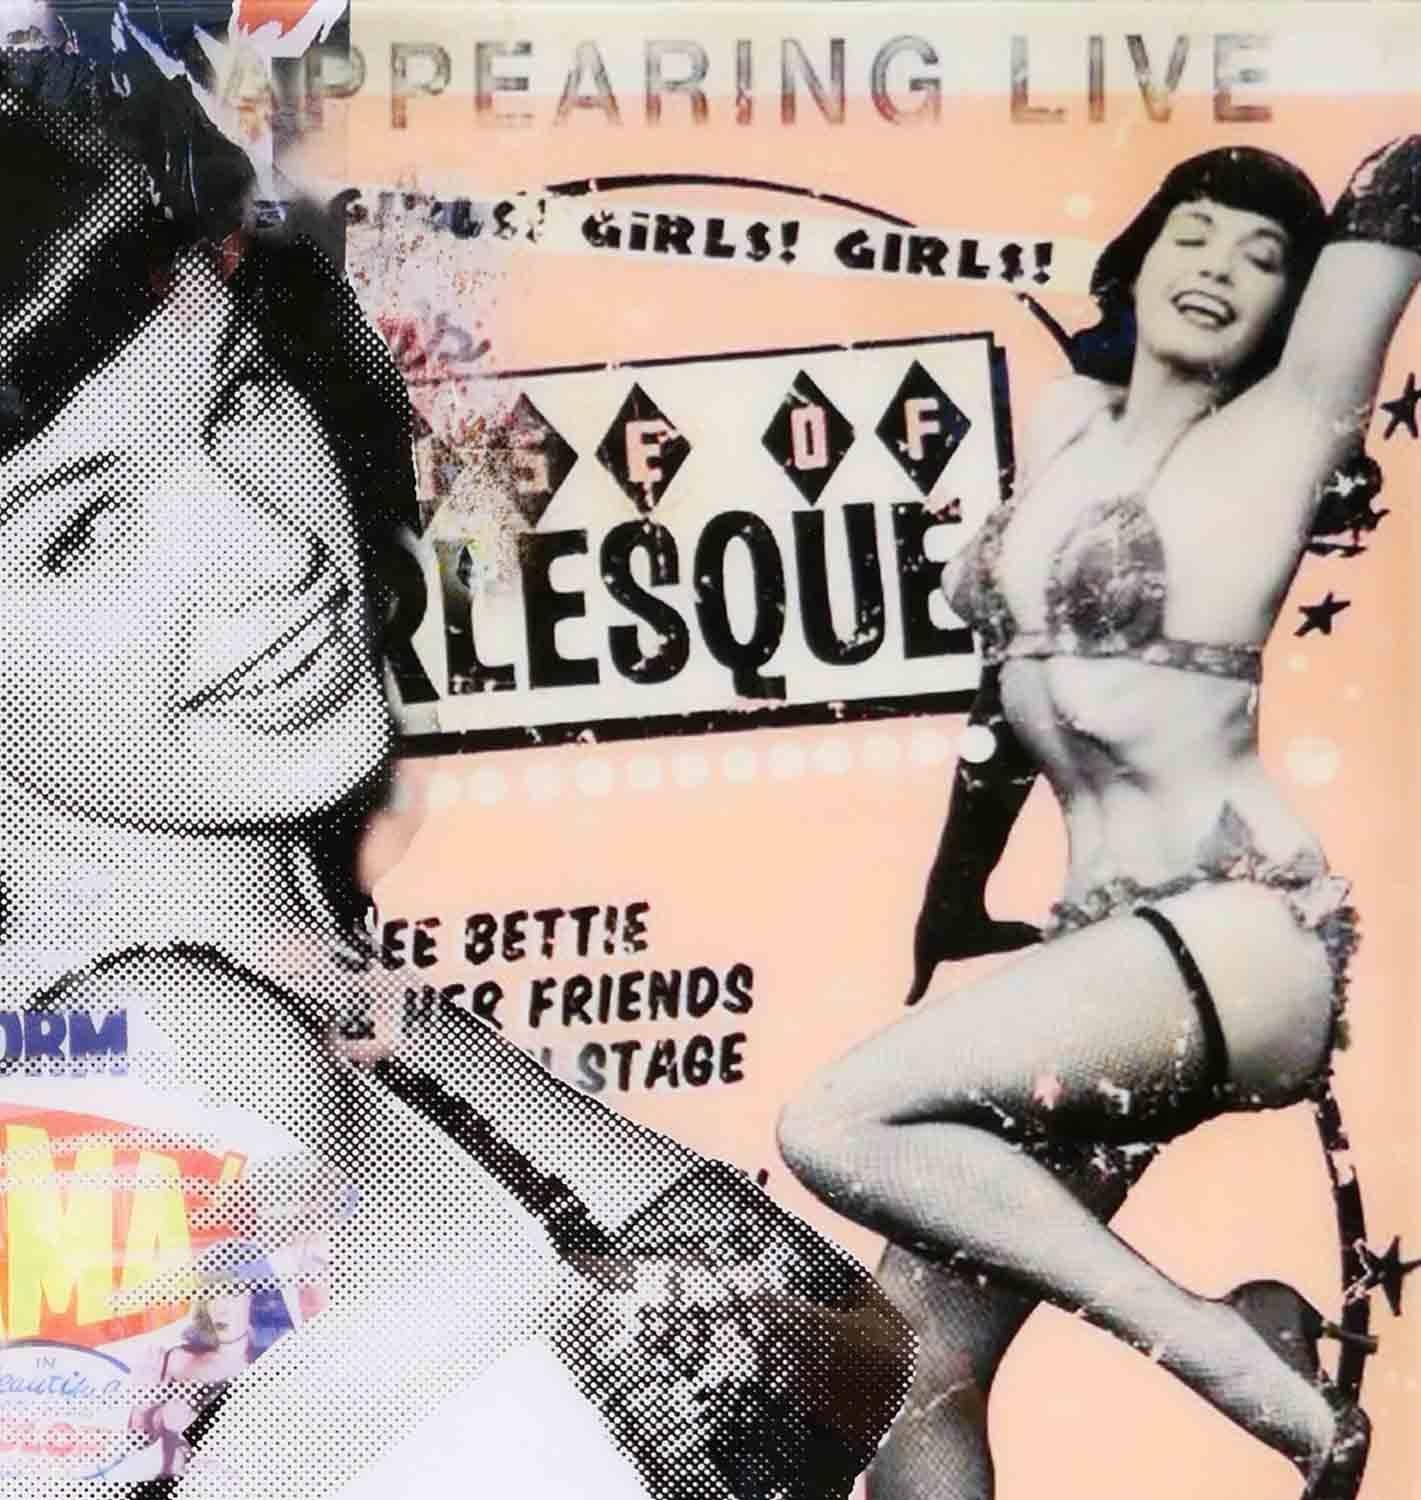 Black, white, and light pink pop art mixed media collage by Houston, Texas artist Jim Hudek. Digitally printed black and white image of Bettie Page against a background of magazine cutouts. Board coated with clear resin. Signed in the front lower